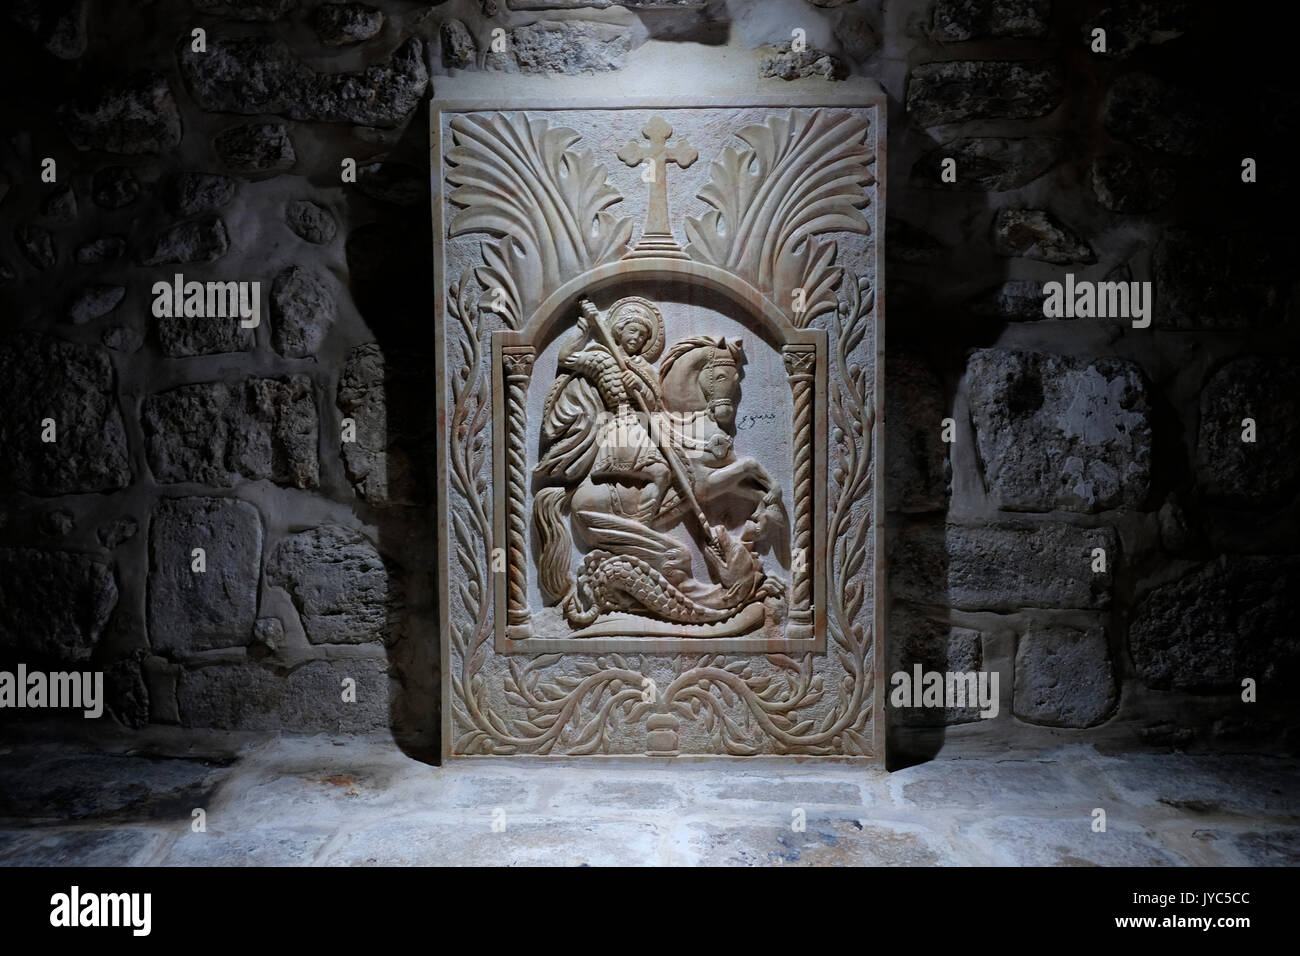 A carved figure depicting an orthodox Christian legend in which Saint George slays a dragon that demanded human sacrifices at the entrance to the St. George Monastery in Saint Francis street in the Christian Quarter old city East Jerusalem Israel Stock Photo